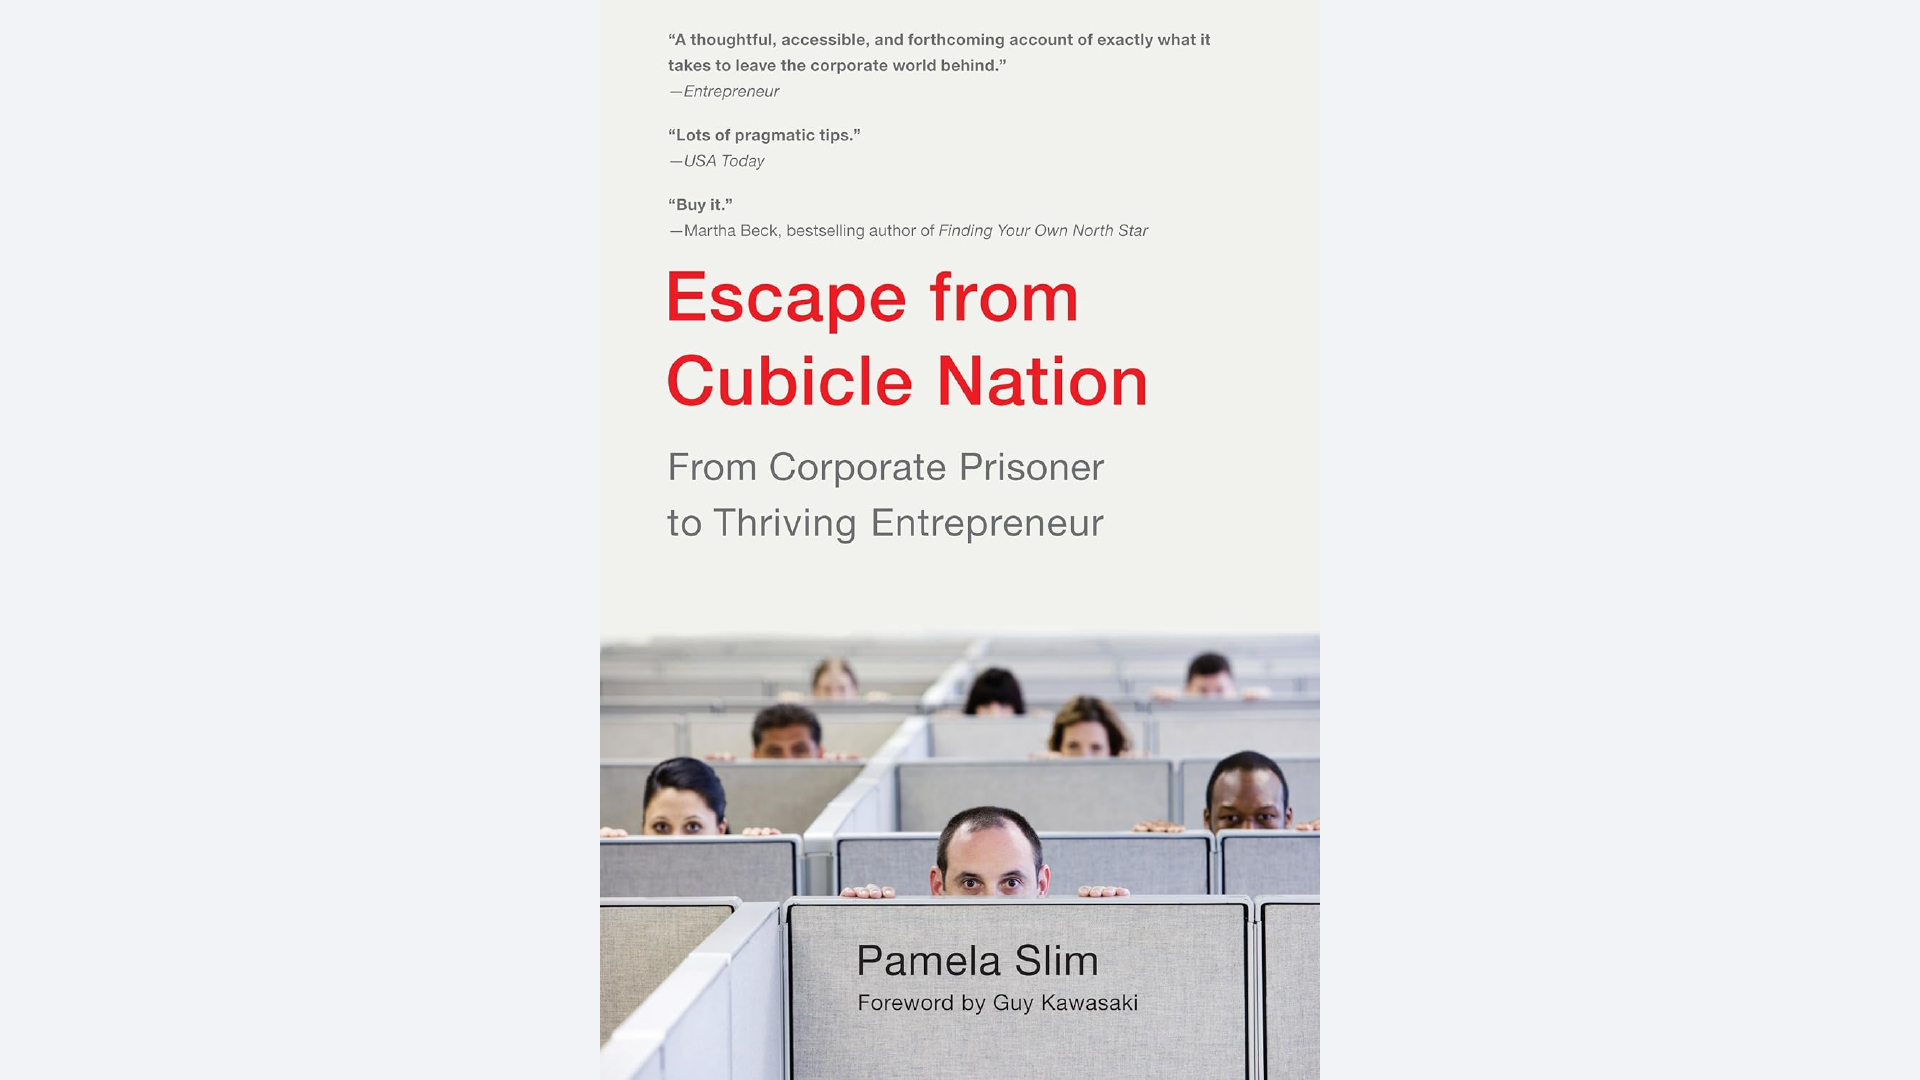 Summary: Escape From Cubicle Nation by Pamela Slim